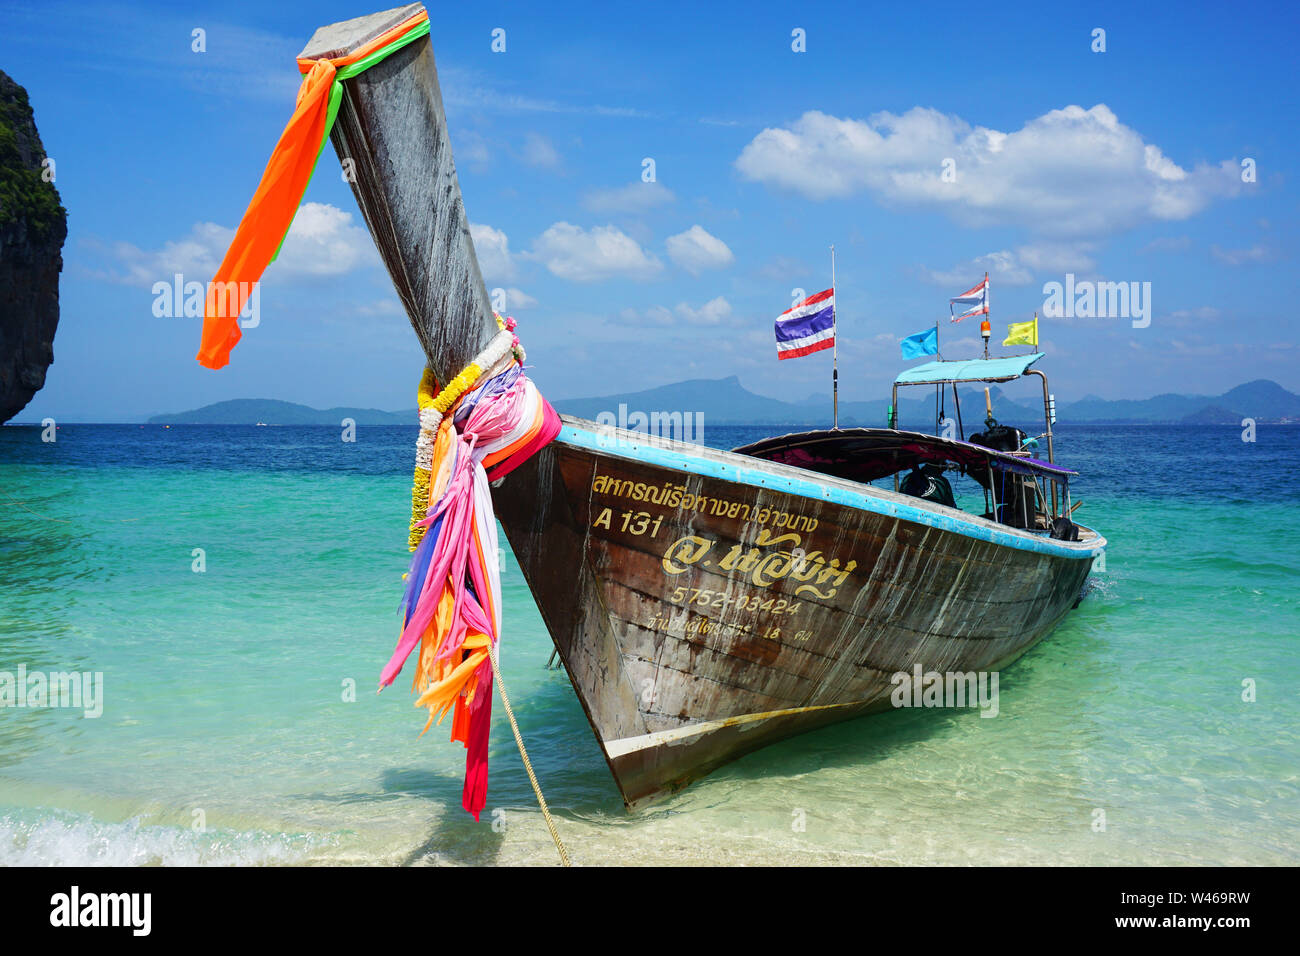 Thailand's traditional long-tail boat docked at a beach in Phi Phi Islands. This boat is colorful with a distinct appearance brings tourists around Stock Photo